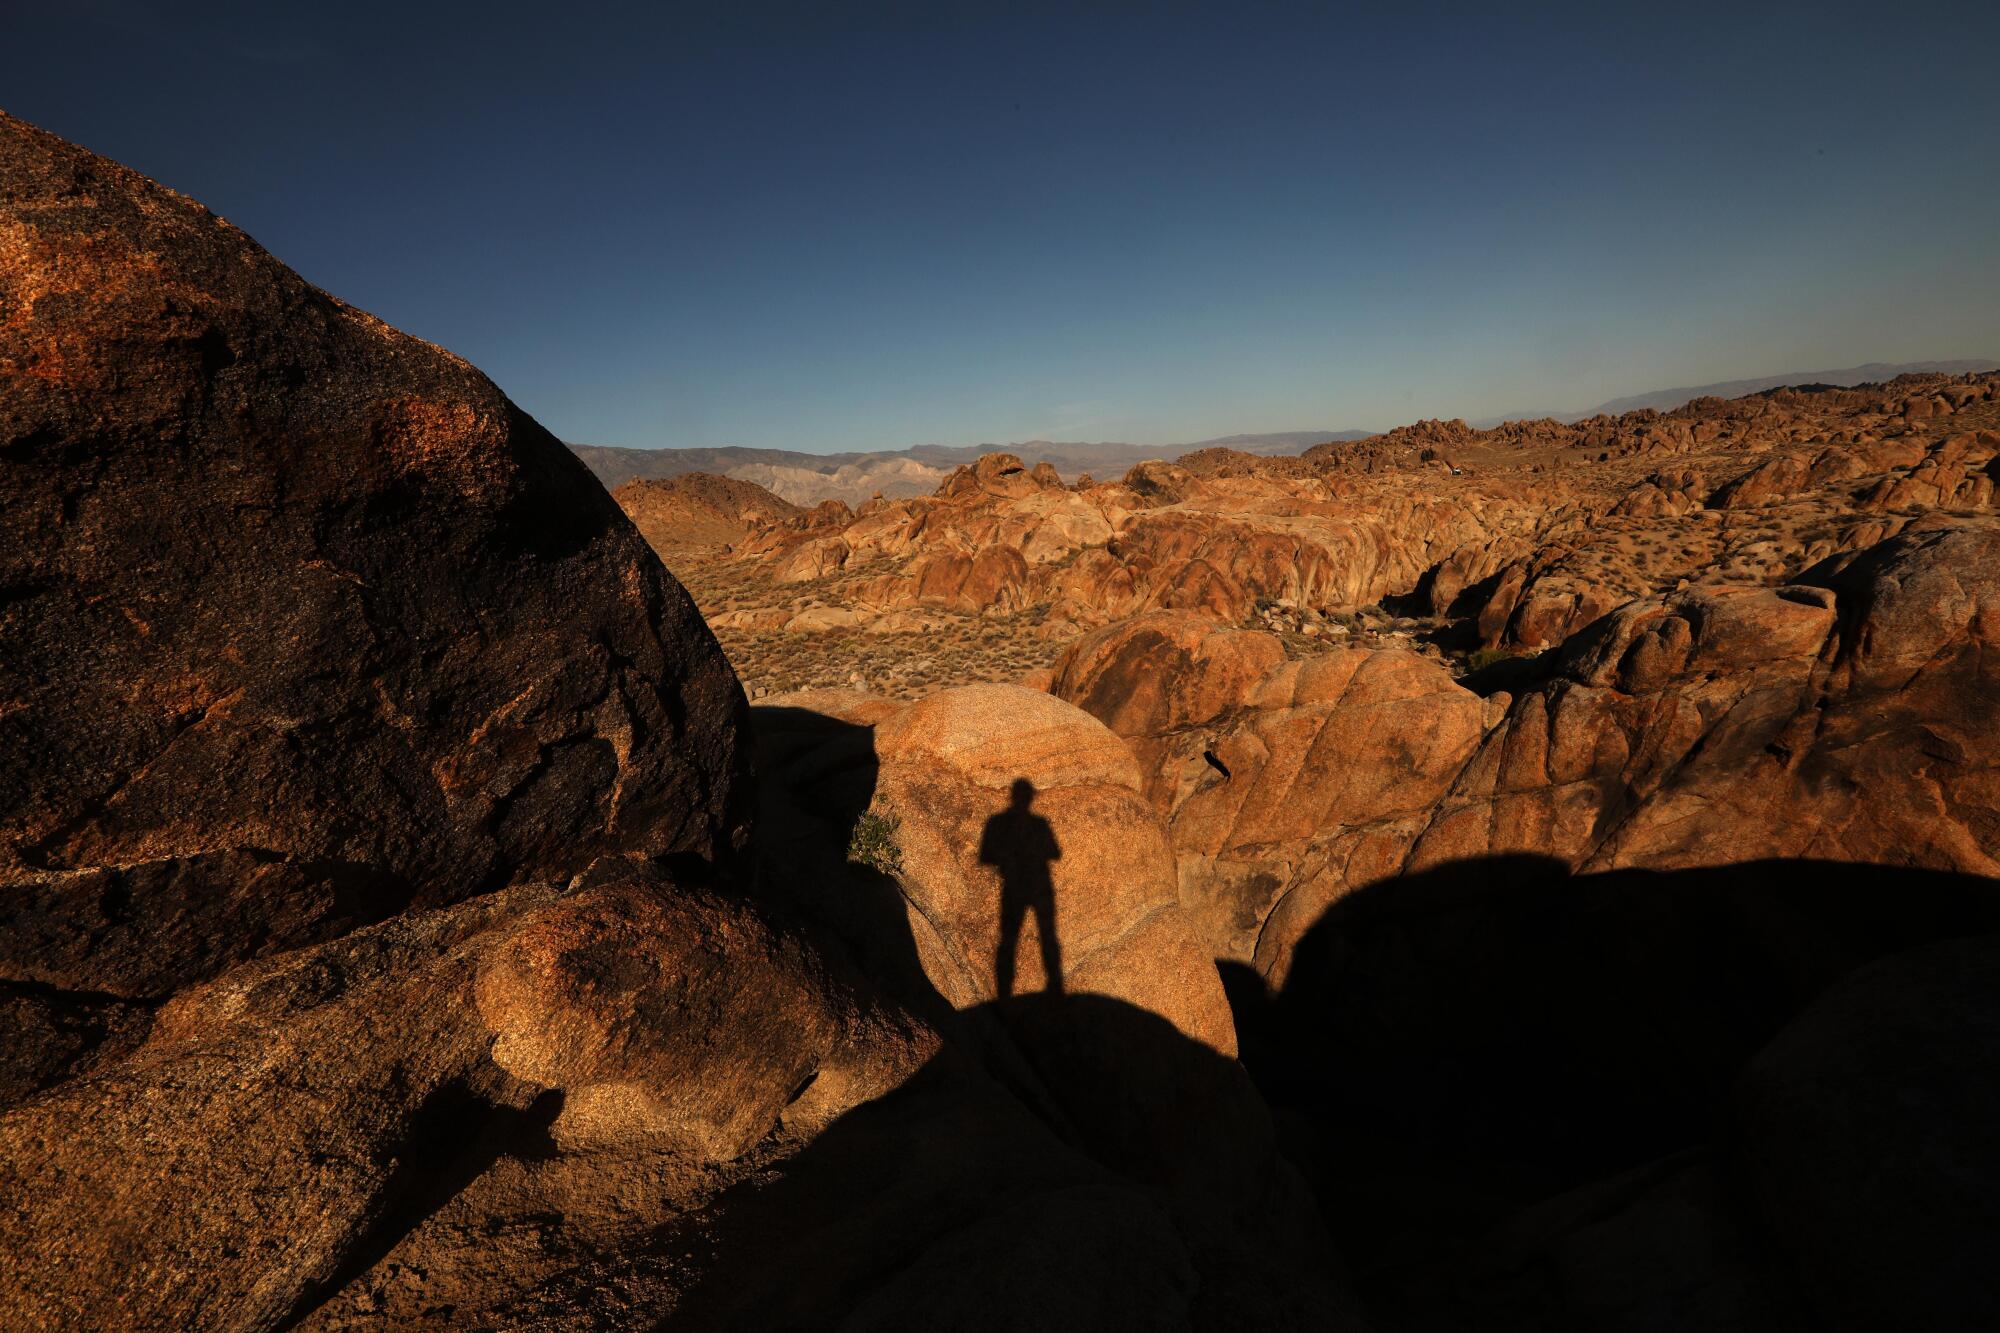 A shadow is cast against a rock formation in the Alabama Hills National Scenic Area by a man standing on a rock